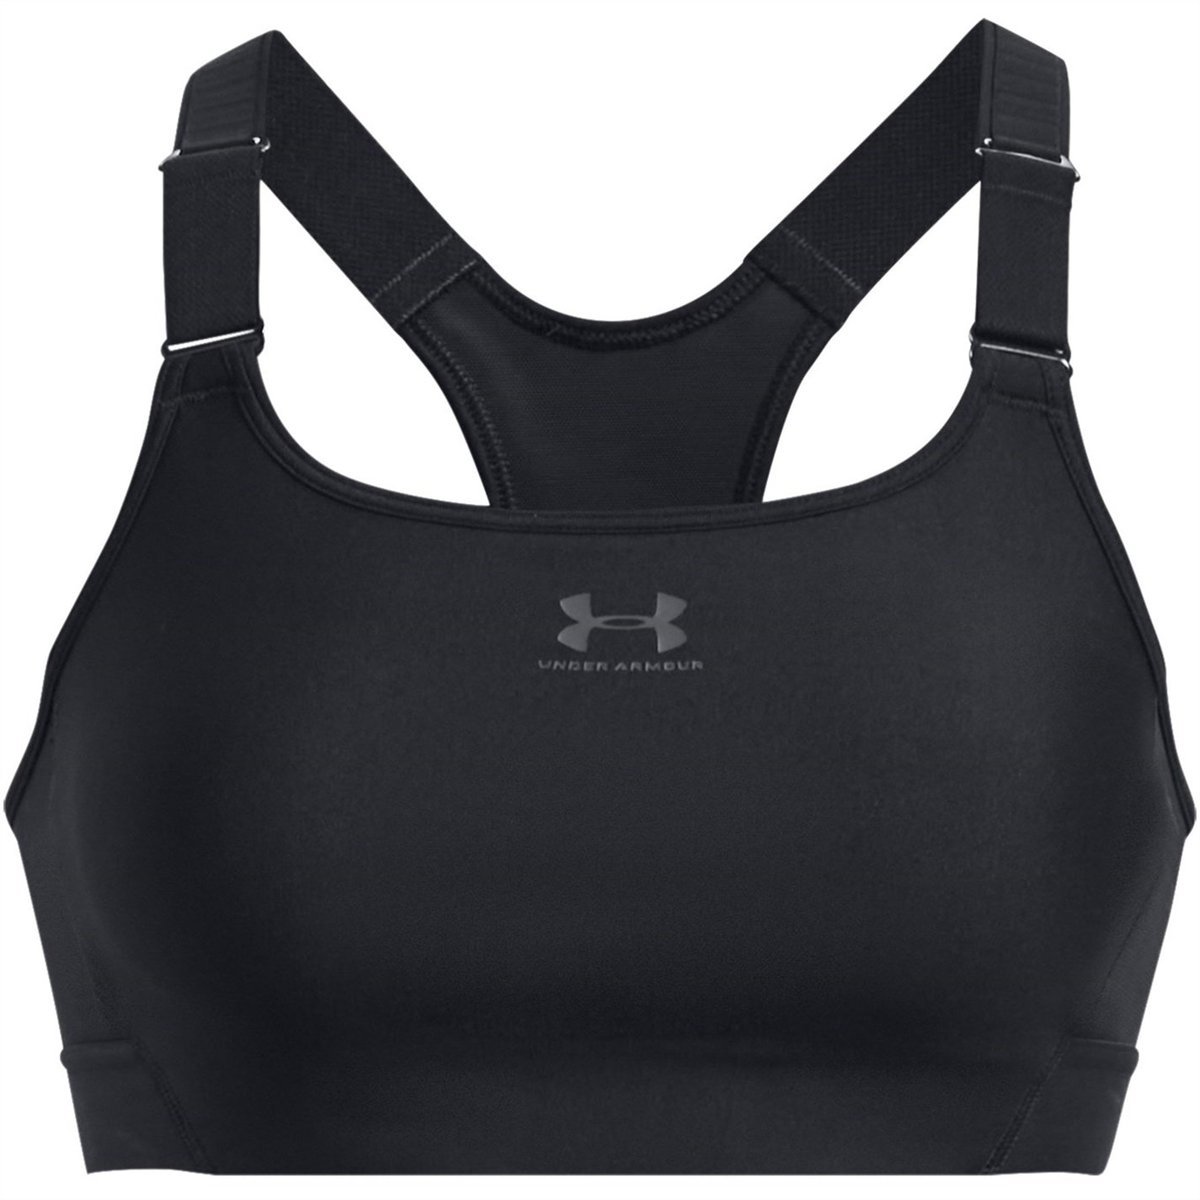  Under Armour Women's Armour® Eclipse High — Zip Sports Bra 34A  Black : Clothing, Shoes & Jewelry